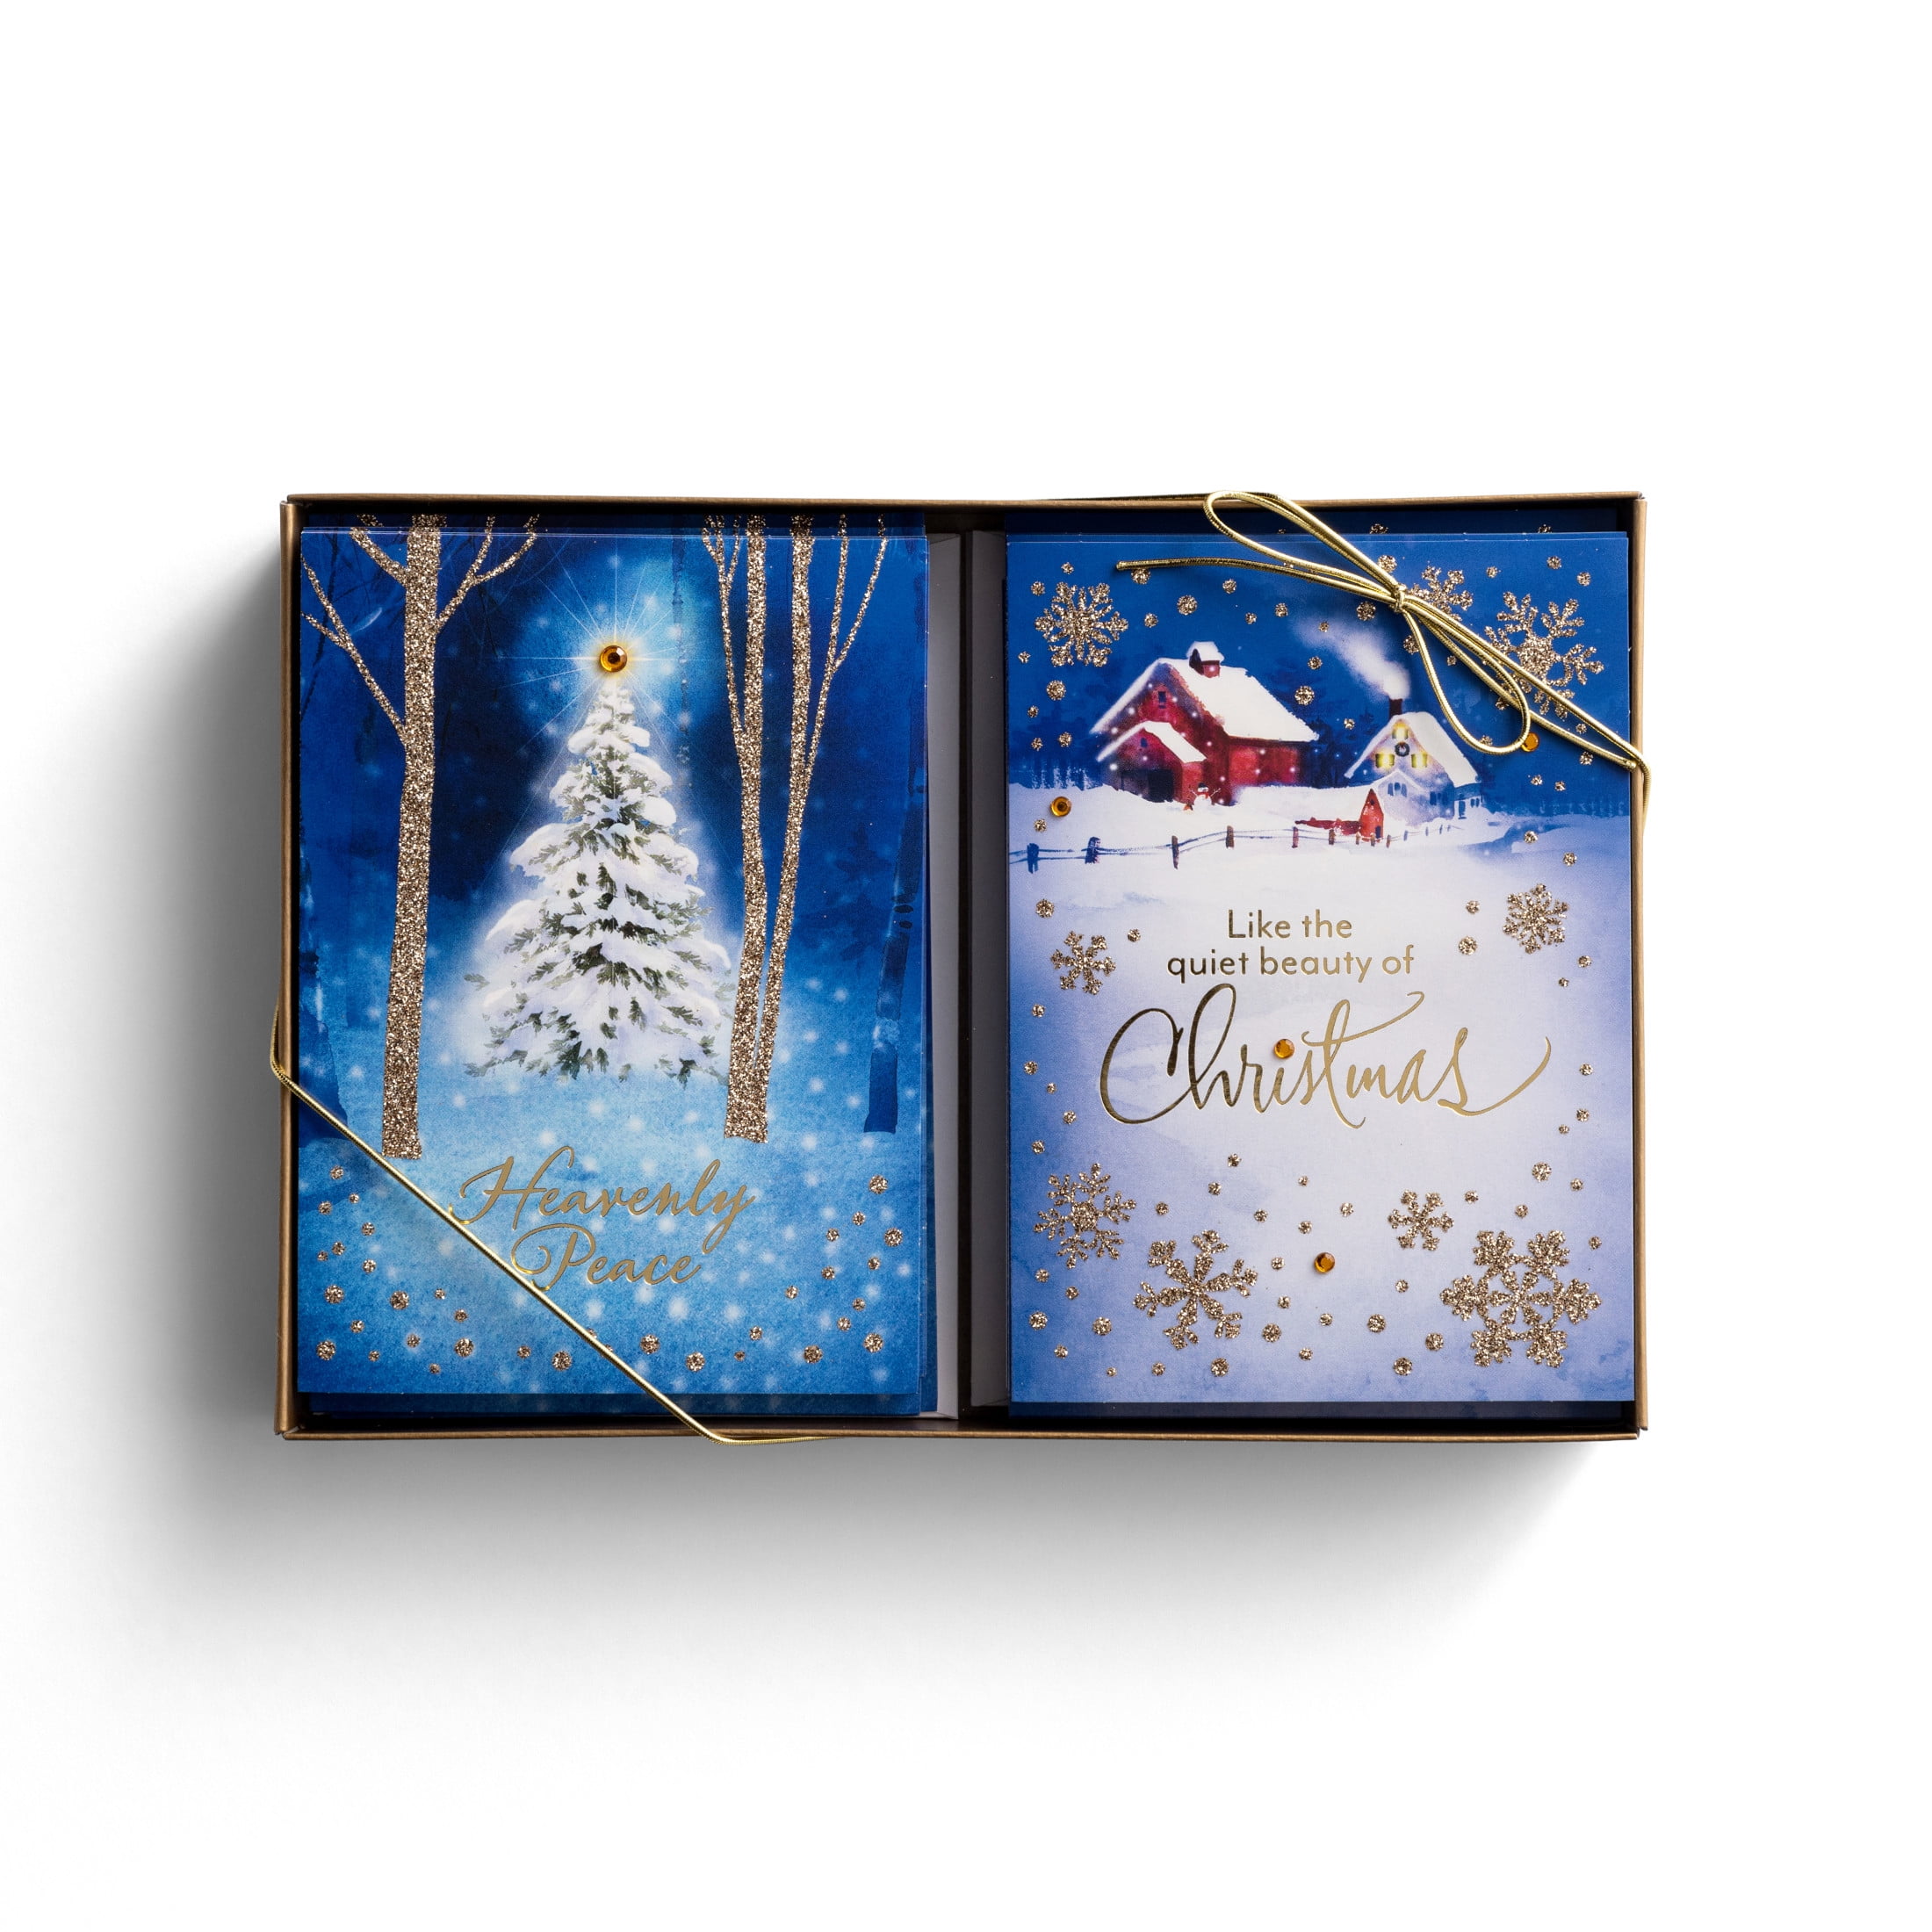 Oh, Holy Night - 50 Christmas Boxed Cards, KJV